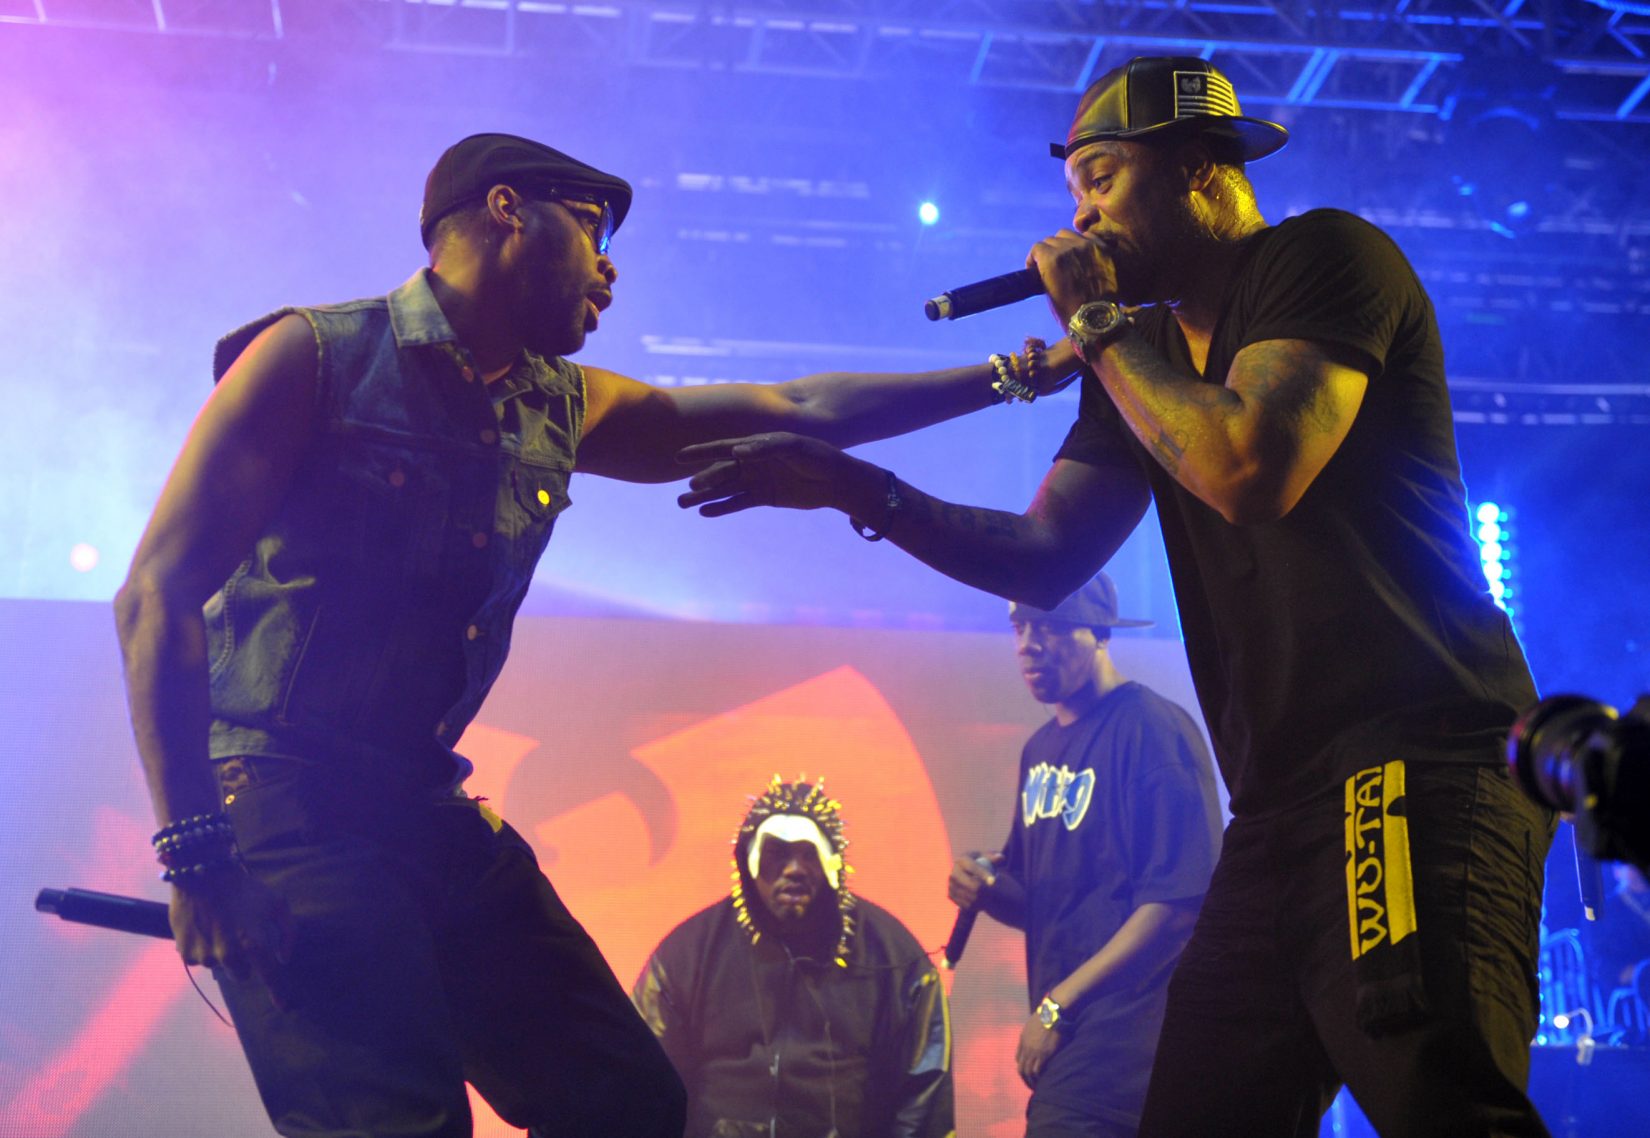 RZA, left, and Method Man of Wu-Tang Clan rocked the second weekend of 2013's Coachella Festiva. Method Man, Ghostface Killah and Raekwon will headline Wu-Years Eve at Cervantes Masterpiece Ballroom in Denver on Dec. 31, 2013. Photo by John Shearer, Invision/AP